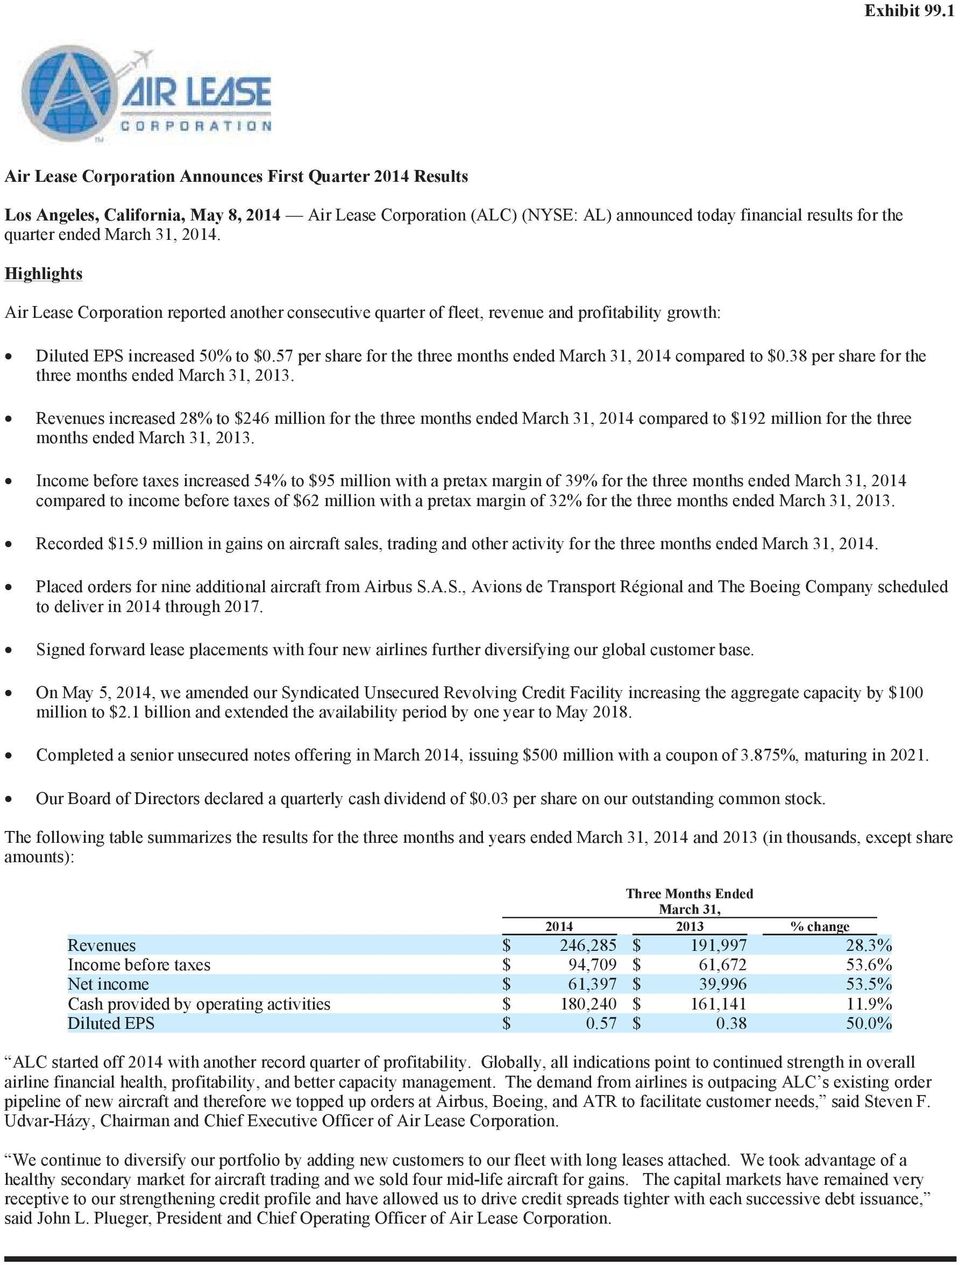 31, 2014. Highlights Air Lease Corporation reported another consecutive quarter of fleet, revenue and profitability growth: Diluted EPS increased 50% to $0.